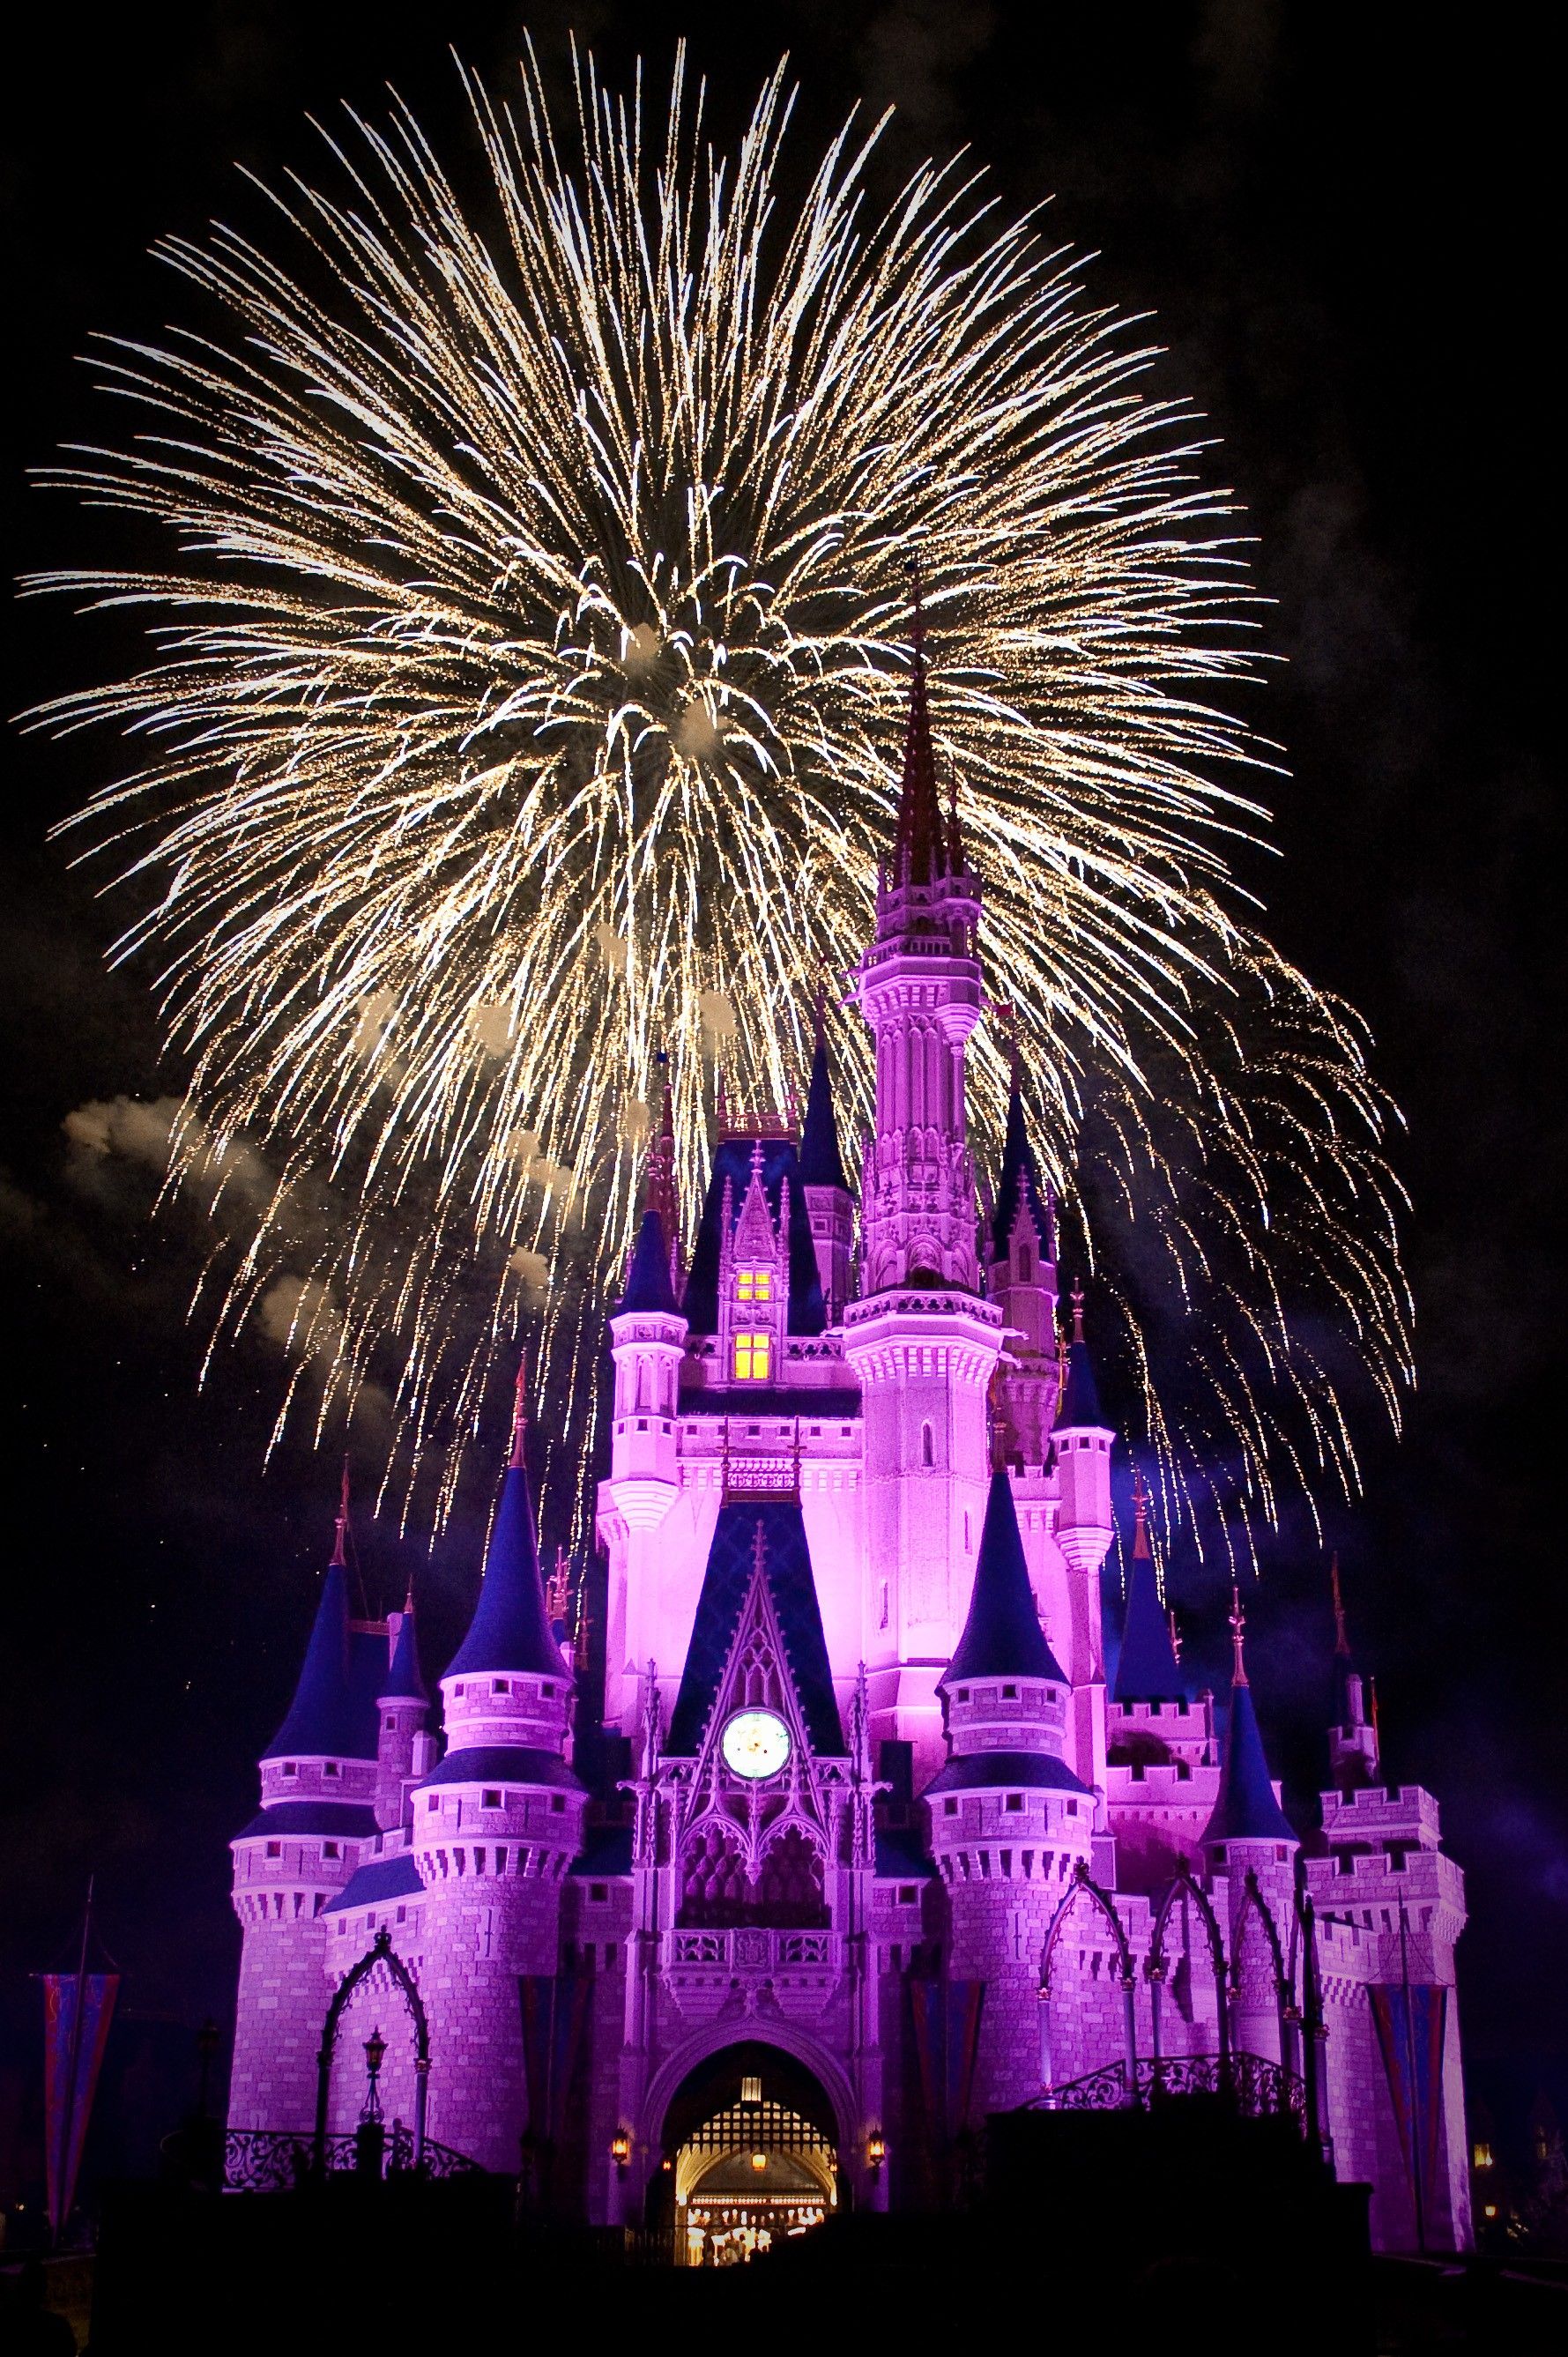 Disney Castle At Night With Fireworks - HD Wallpaper 